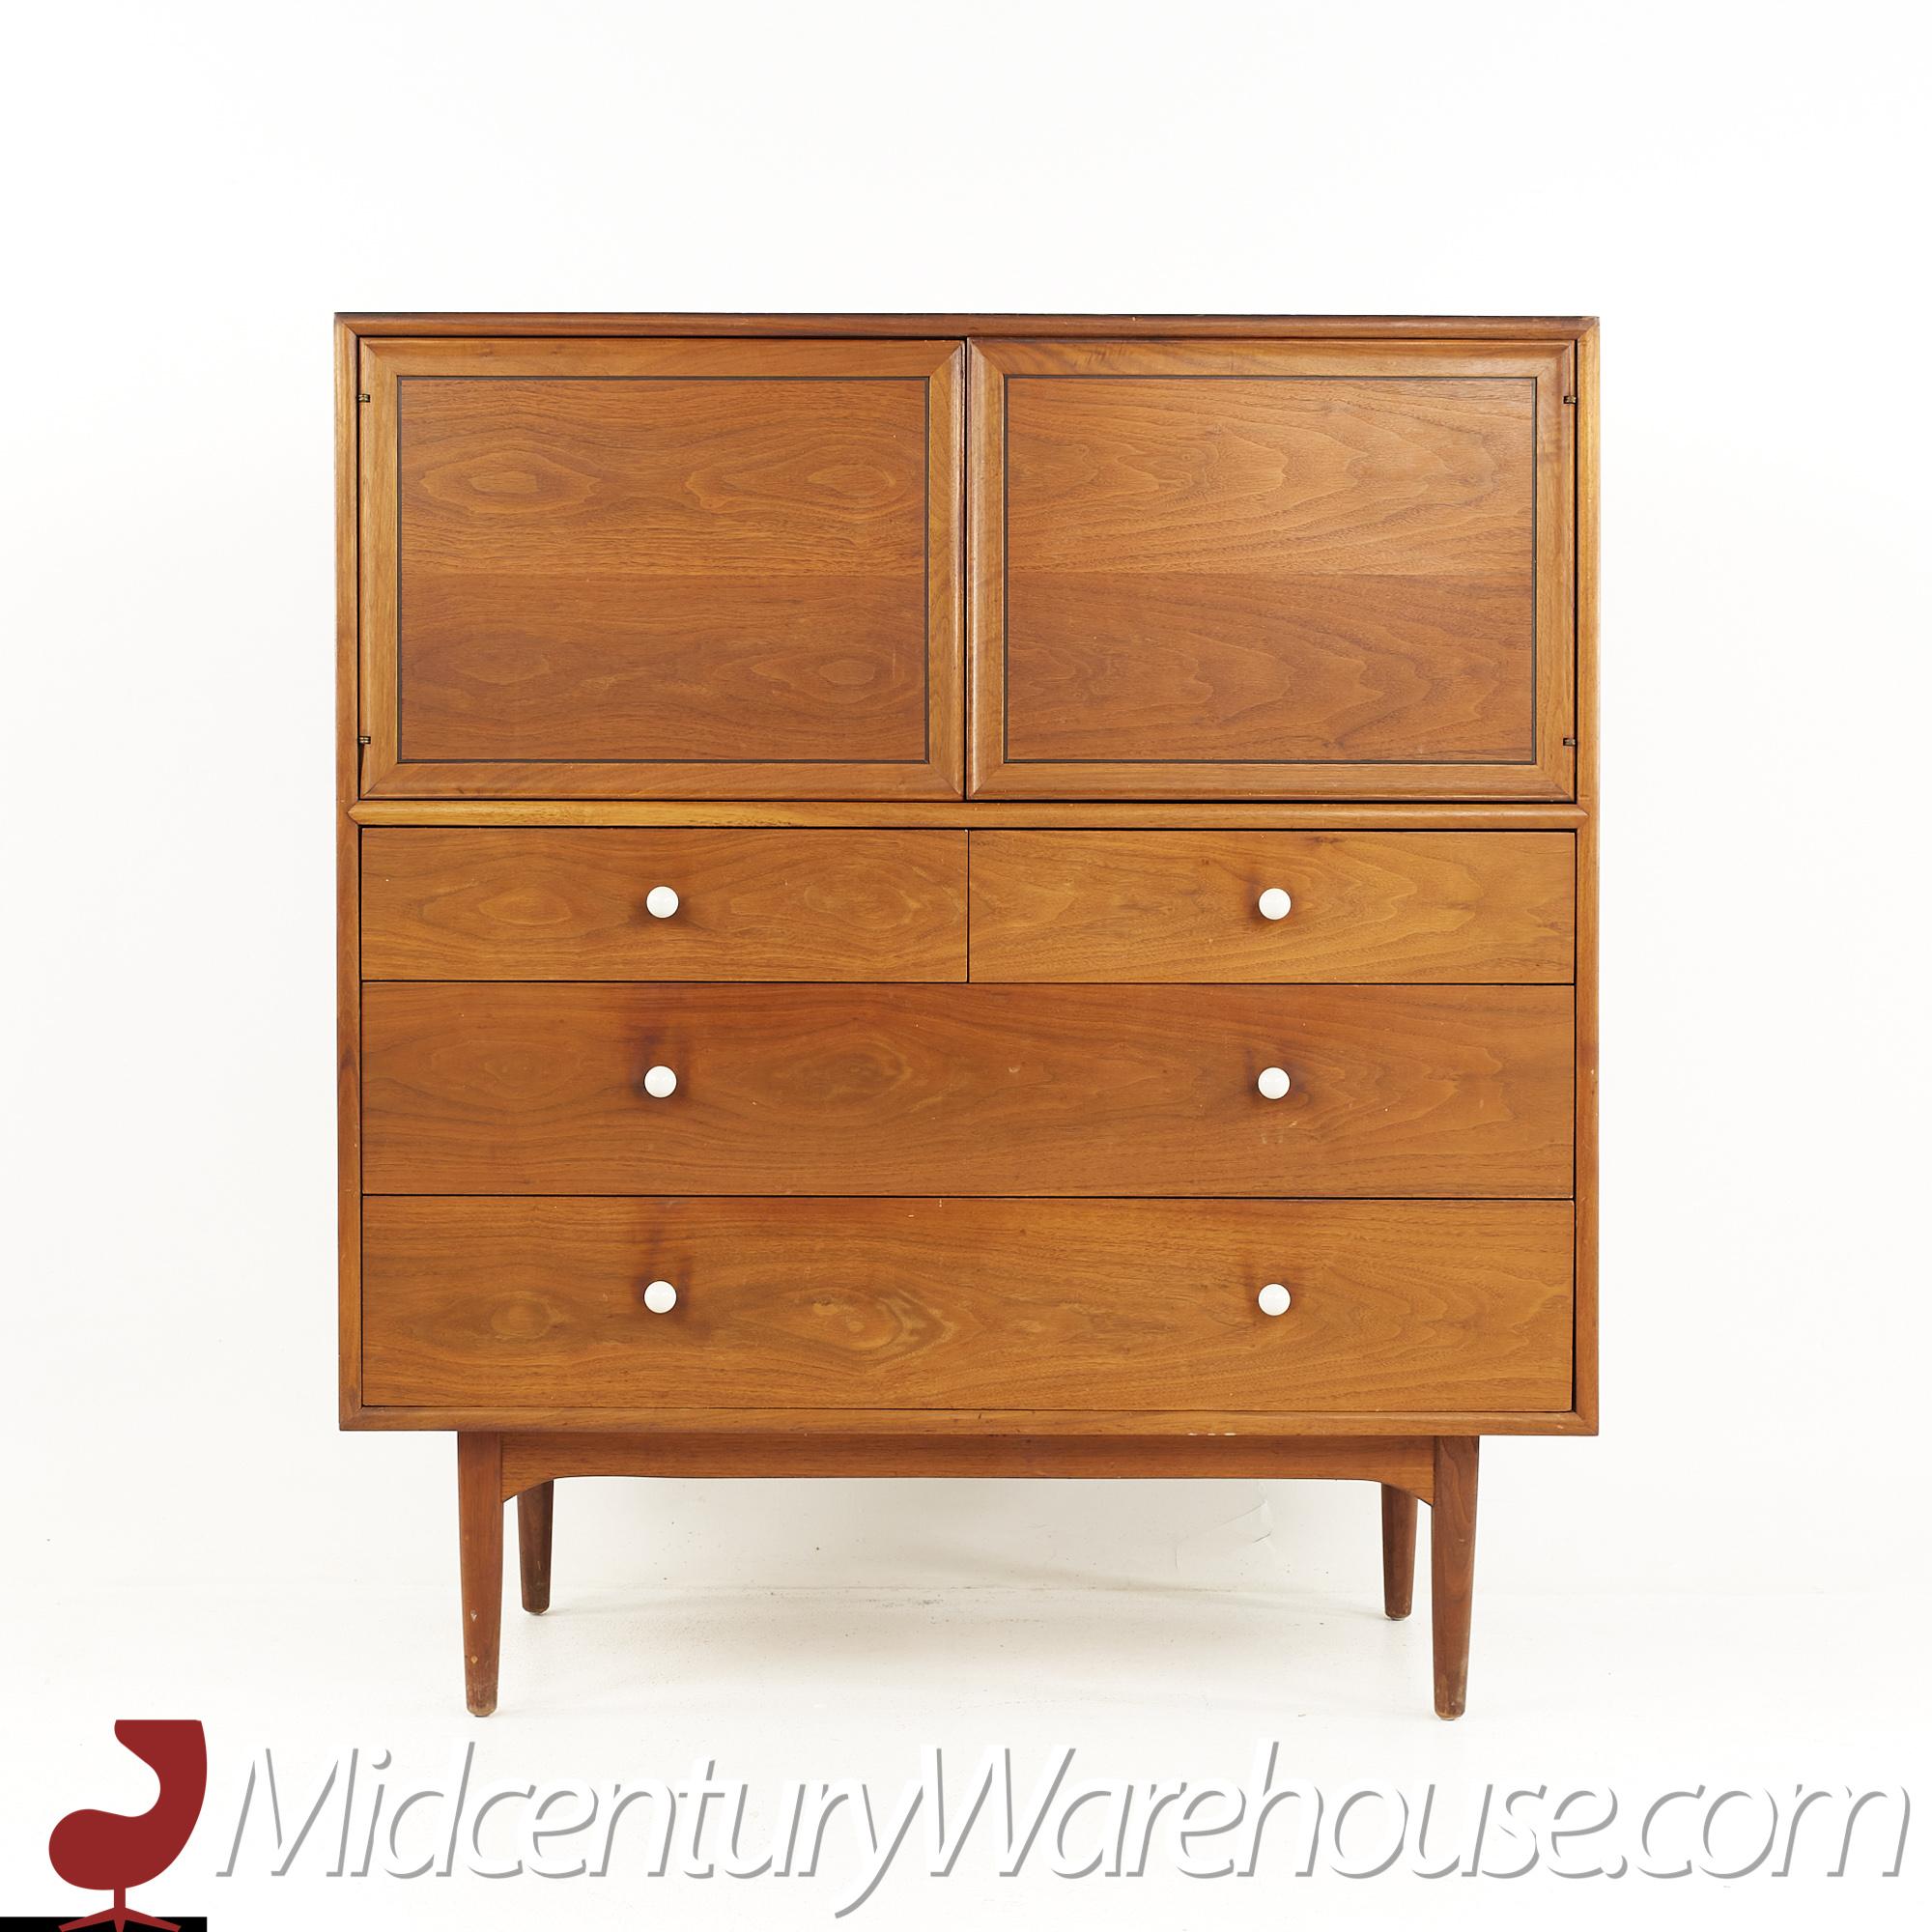 Kipp Stewart for Drexel Declaration mid century walnut highboy gentlemans chest

The chest measures: 42 wide x 20 deep x 47.5 inches high

All pieces of furniture can be had in what we call restored vintage condition. That means the piece is